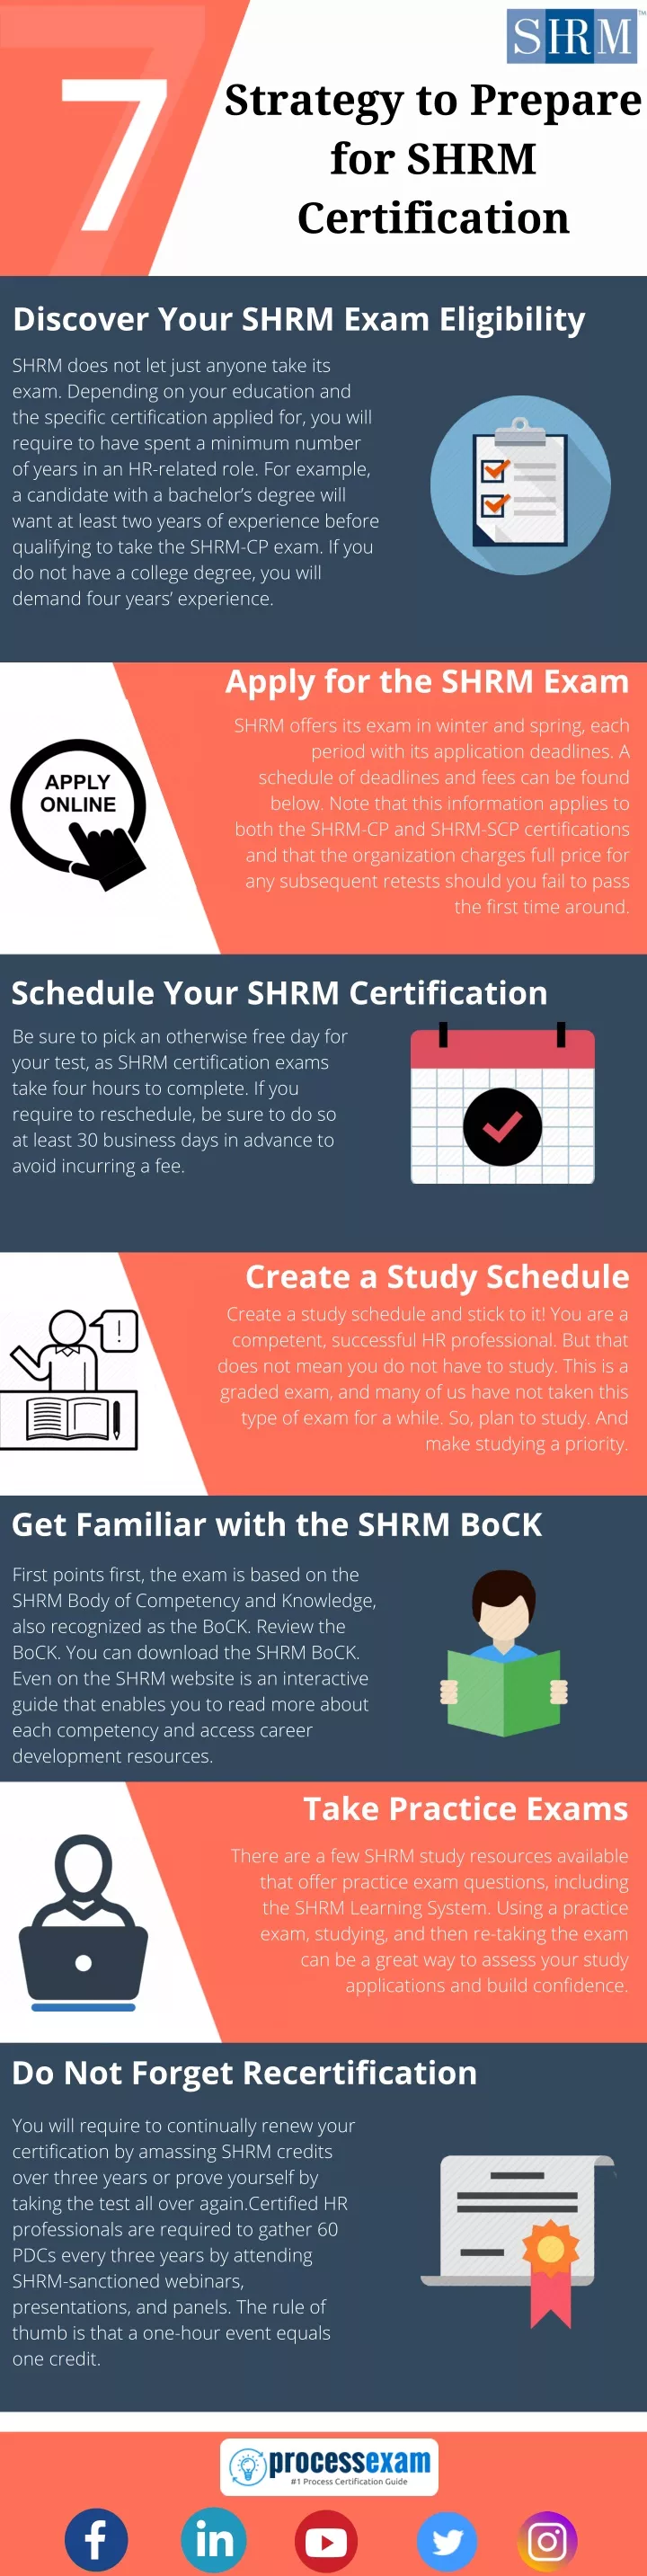 strategy to prepare for shrm certification